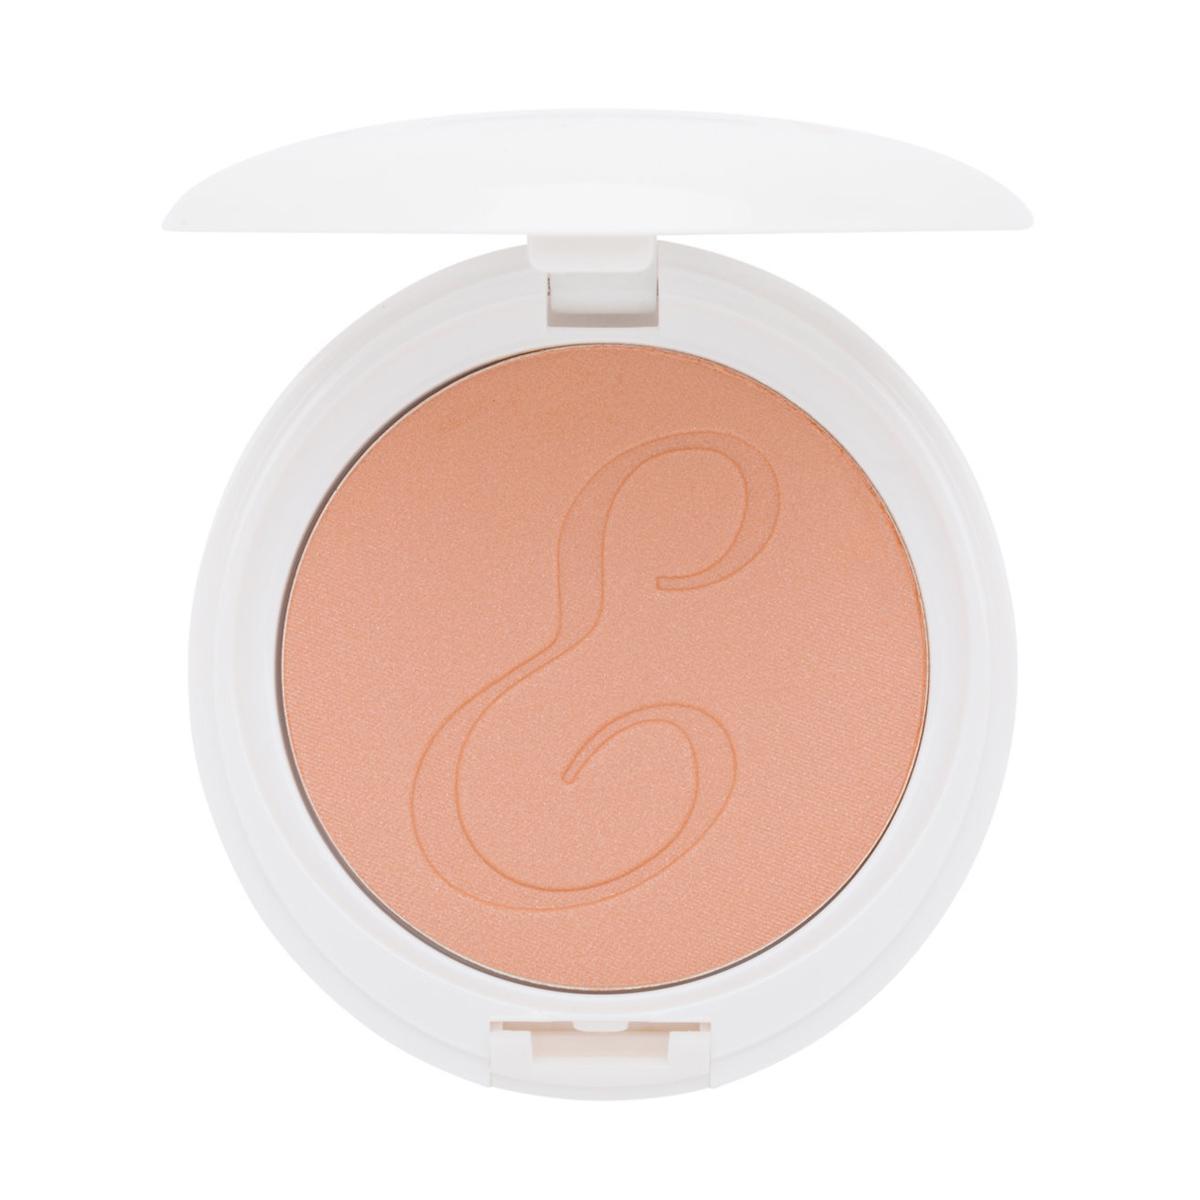 Primary image of Radiant Complexion Compact Powder